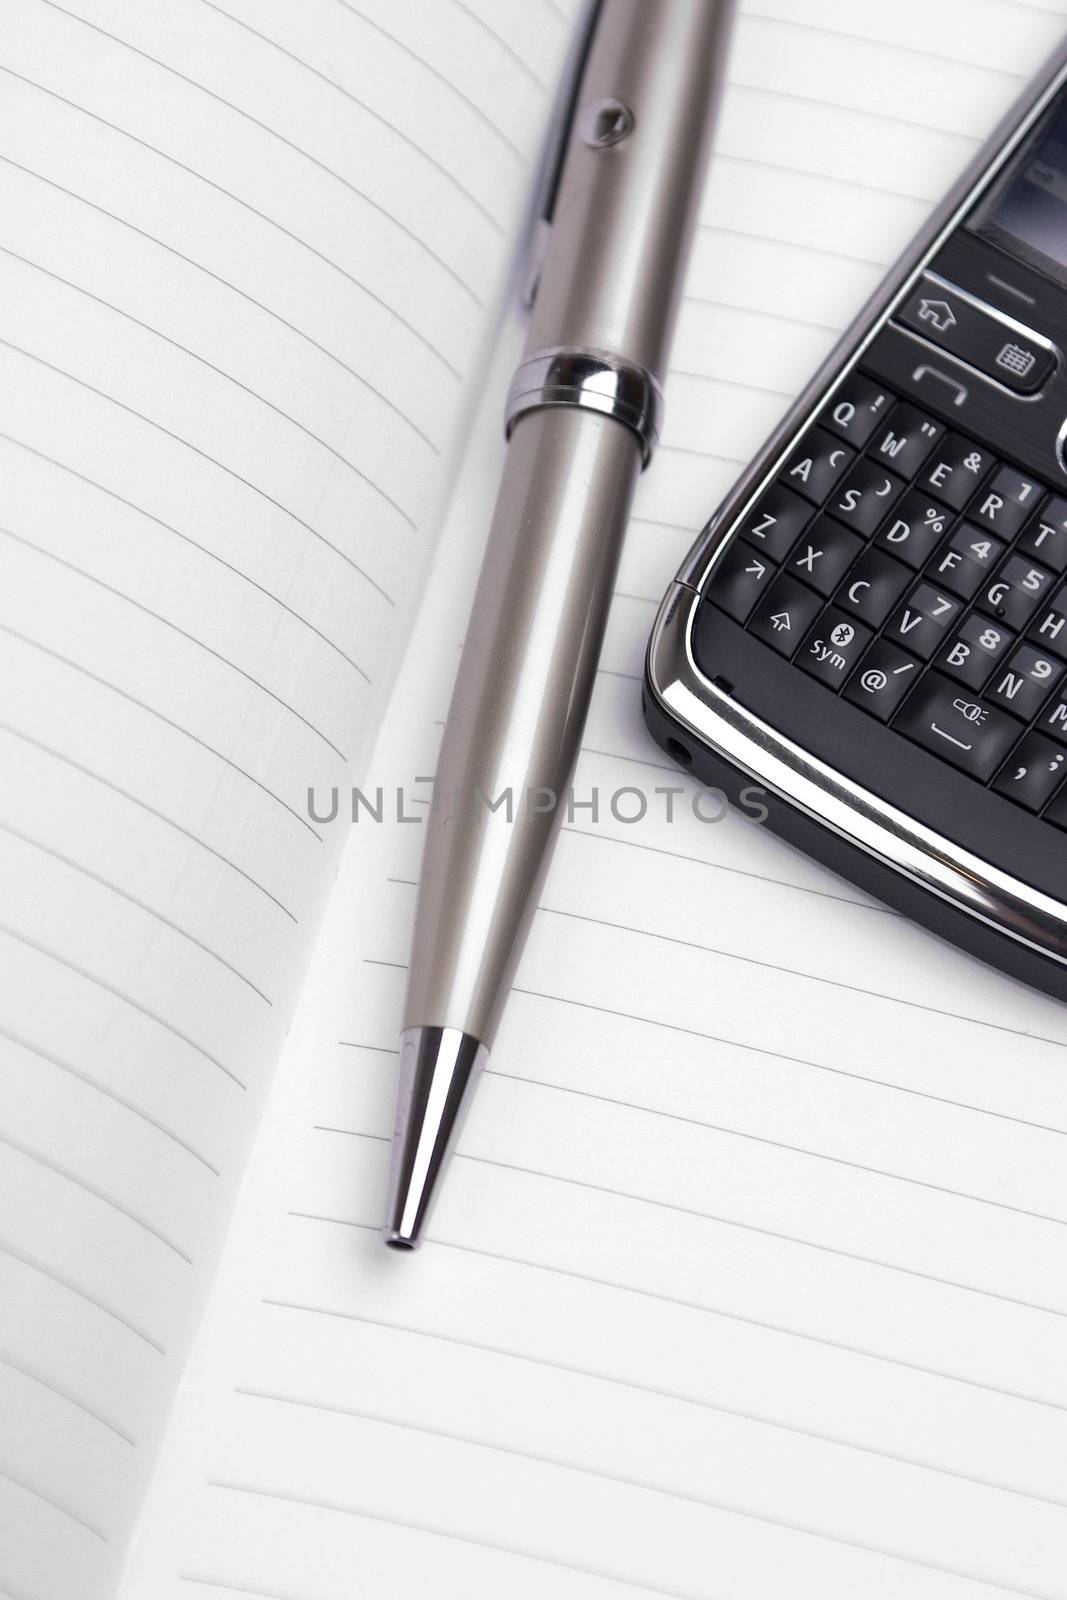 Pen and cellphone on top of a notebook.